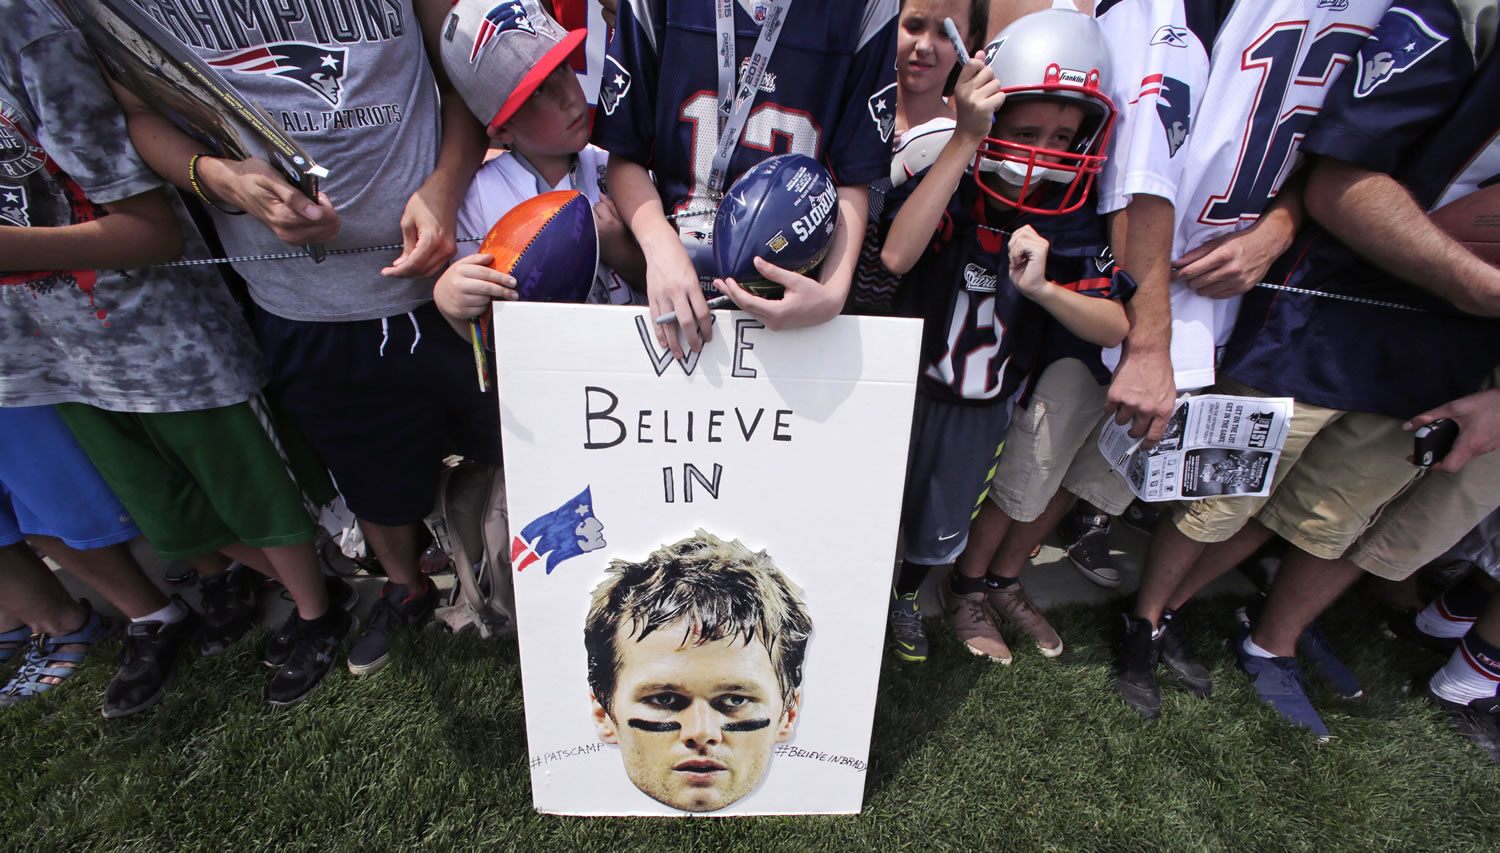 New England Patriots fans wait July 30 for practice to complete, while standing behind a sign supporting quarterback Tom Brady, during an NFL football training camp in Foxborough, Mass. A federal judge deflated "Deflategate" on  Thursday, erasing New England quarterback Tom Brady's four-game suspension for a controversy that the NFL claimed threatened football's integrity. U.S. District Judge Richard M.